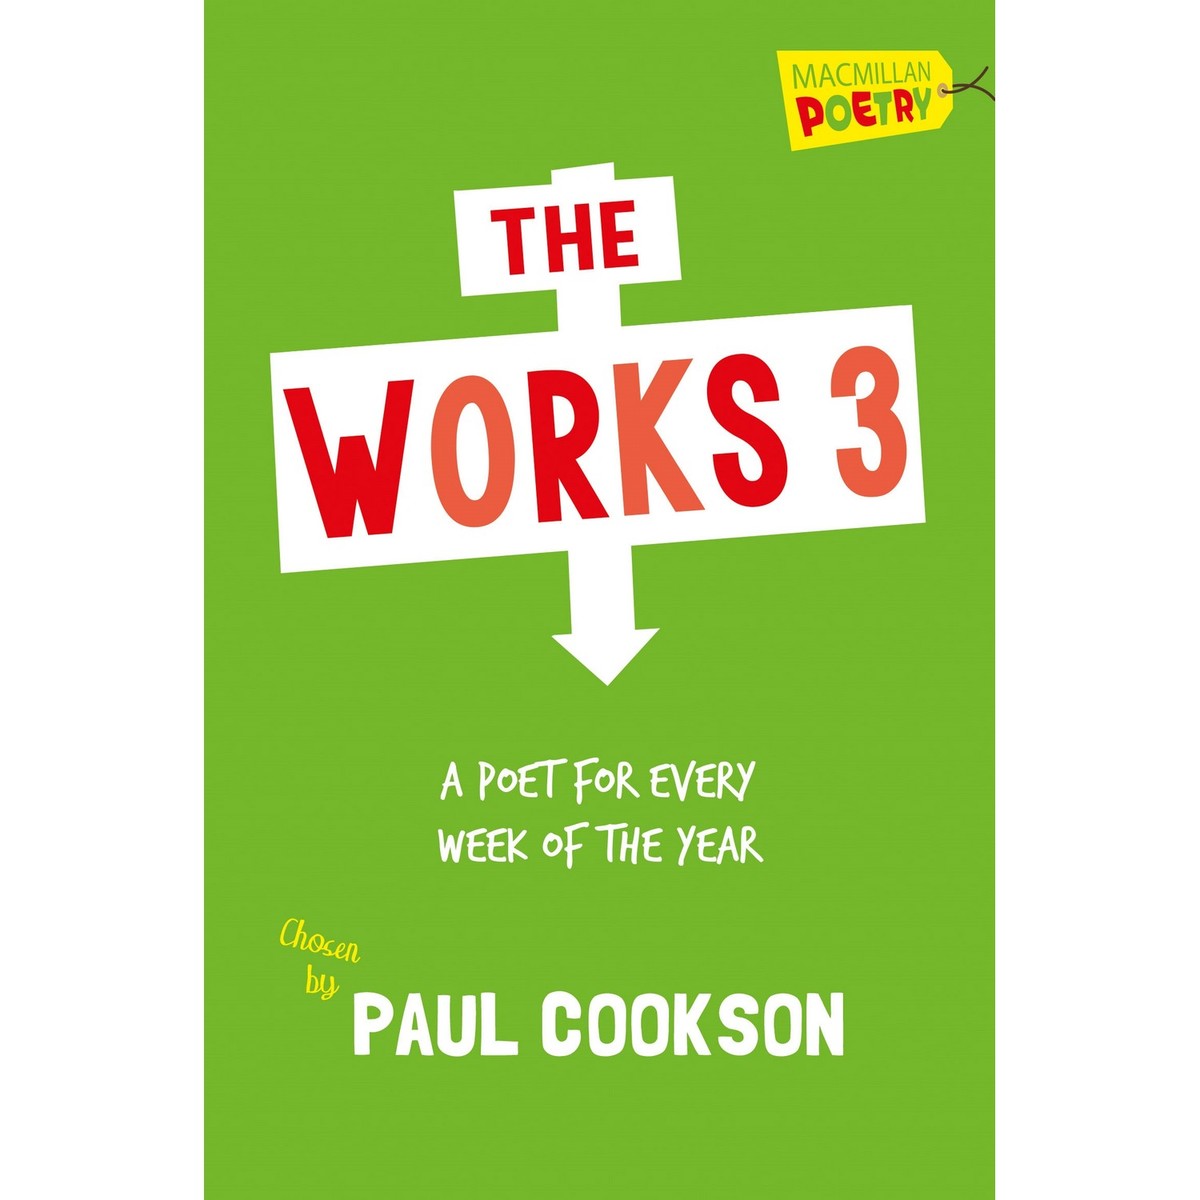 The Works 3